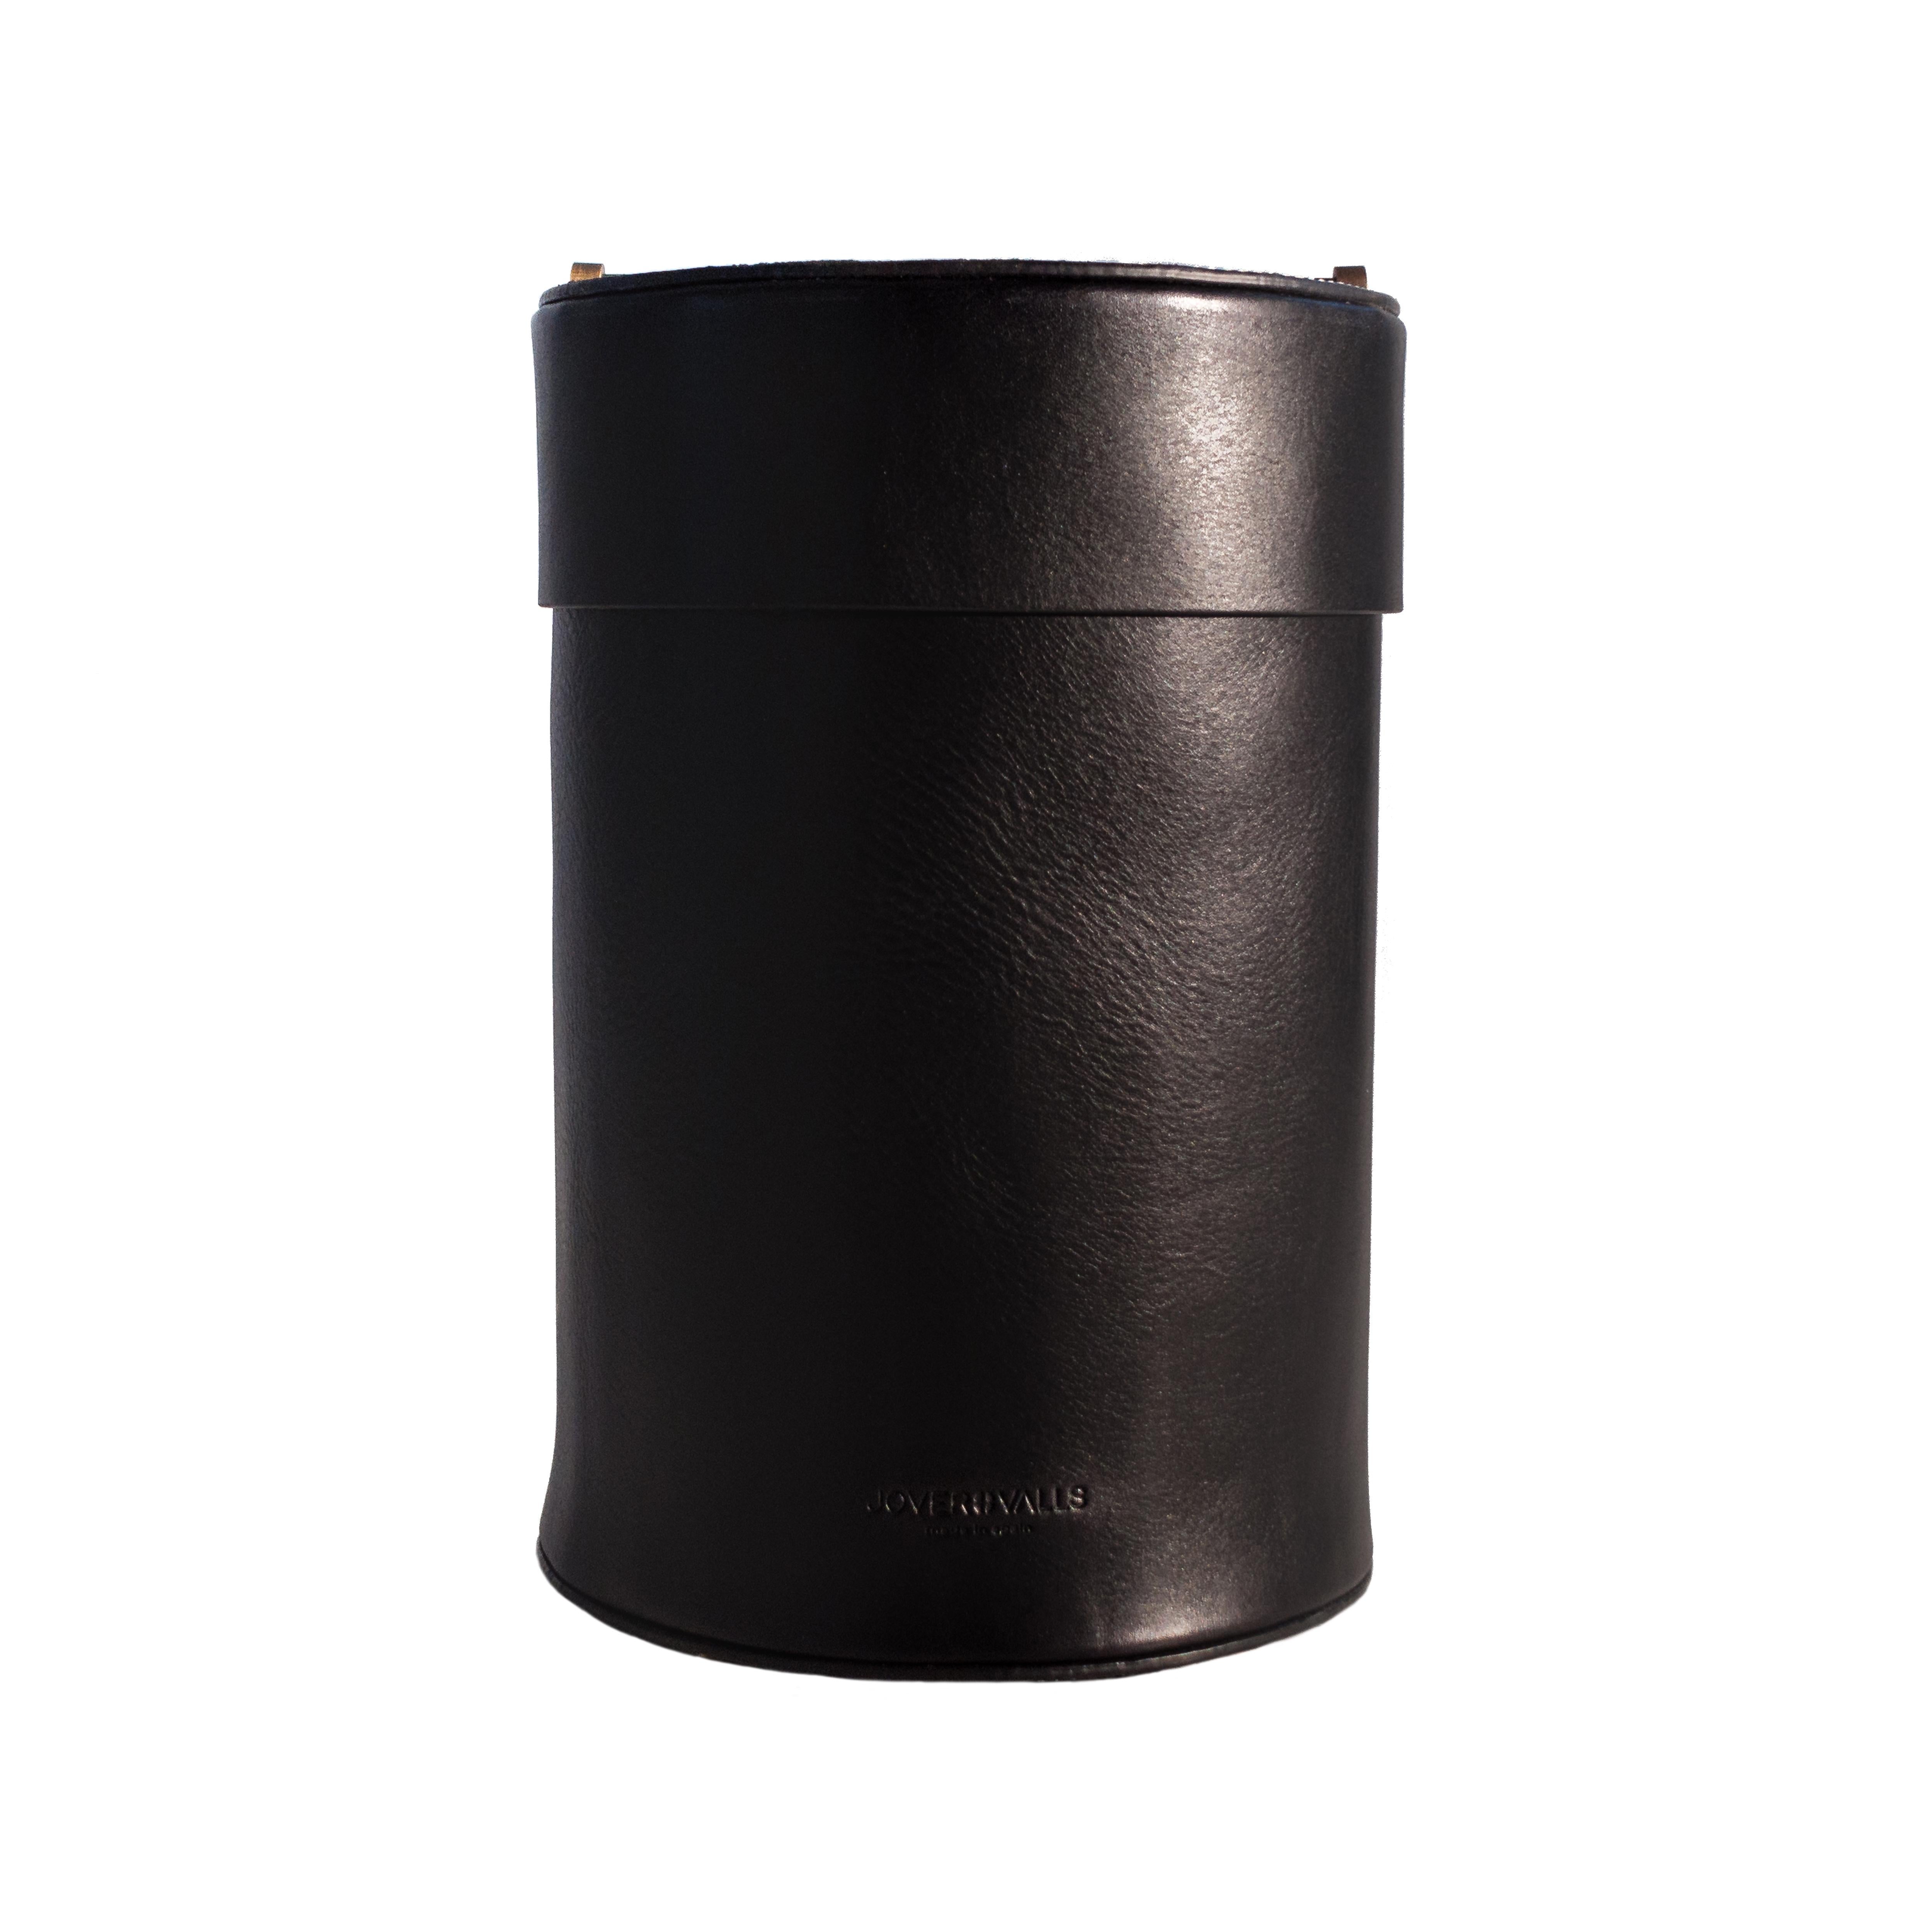 Spanish Luxury Paper Bin Handcrafted in Black Cowhide Leather with Brass Details For Sale